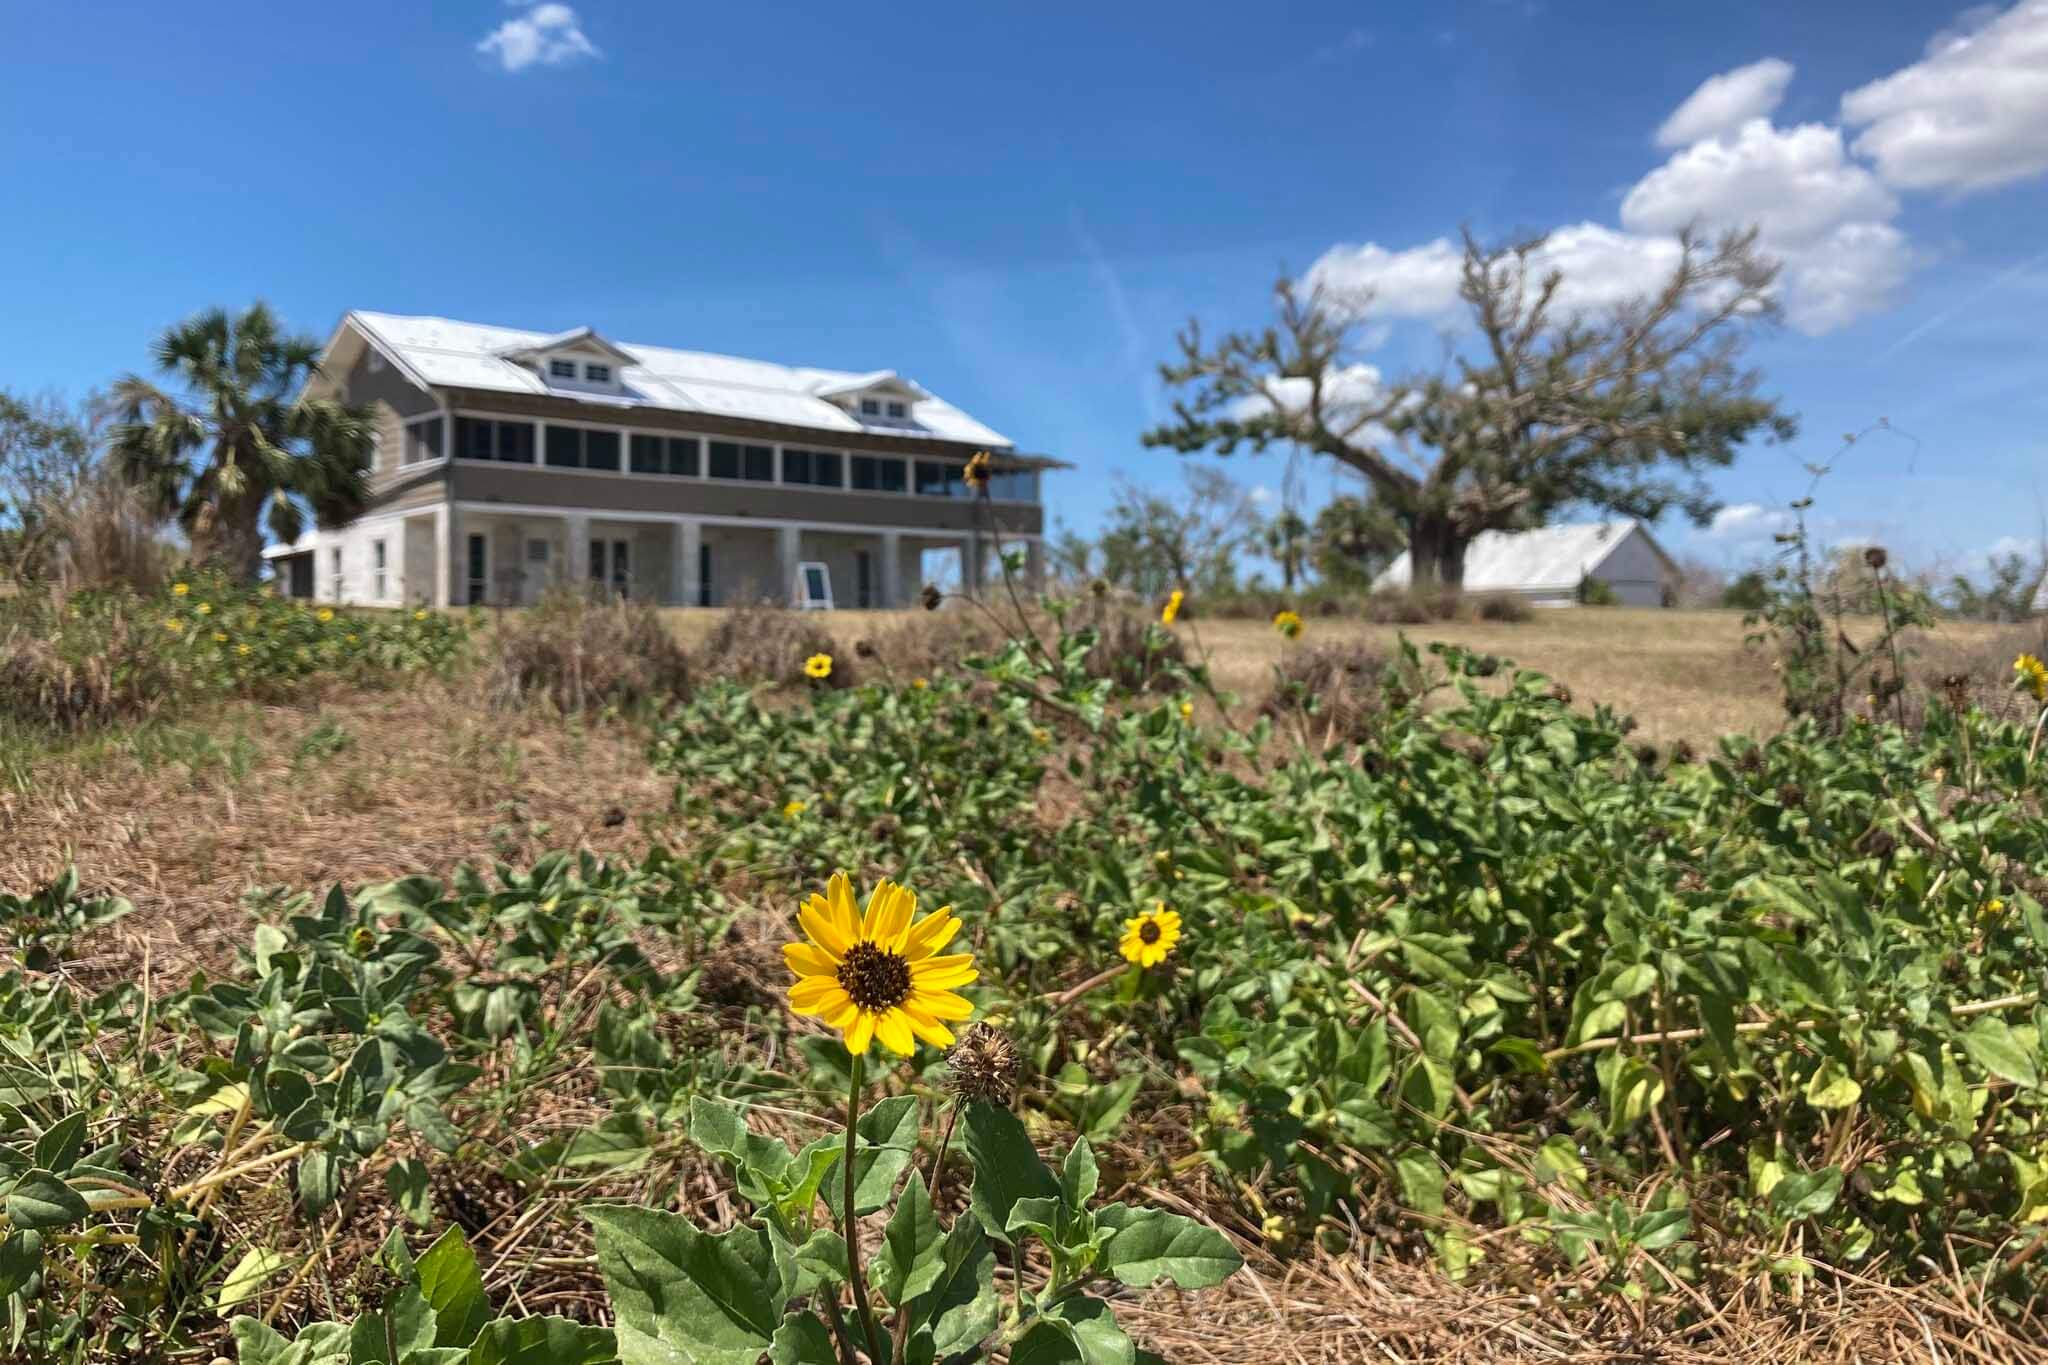 Sunflower on the front of the image with a house in the background. 